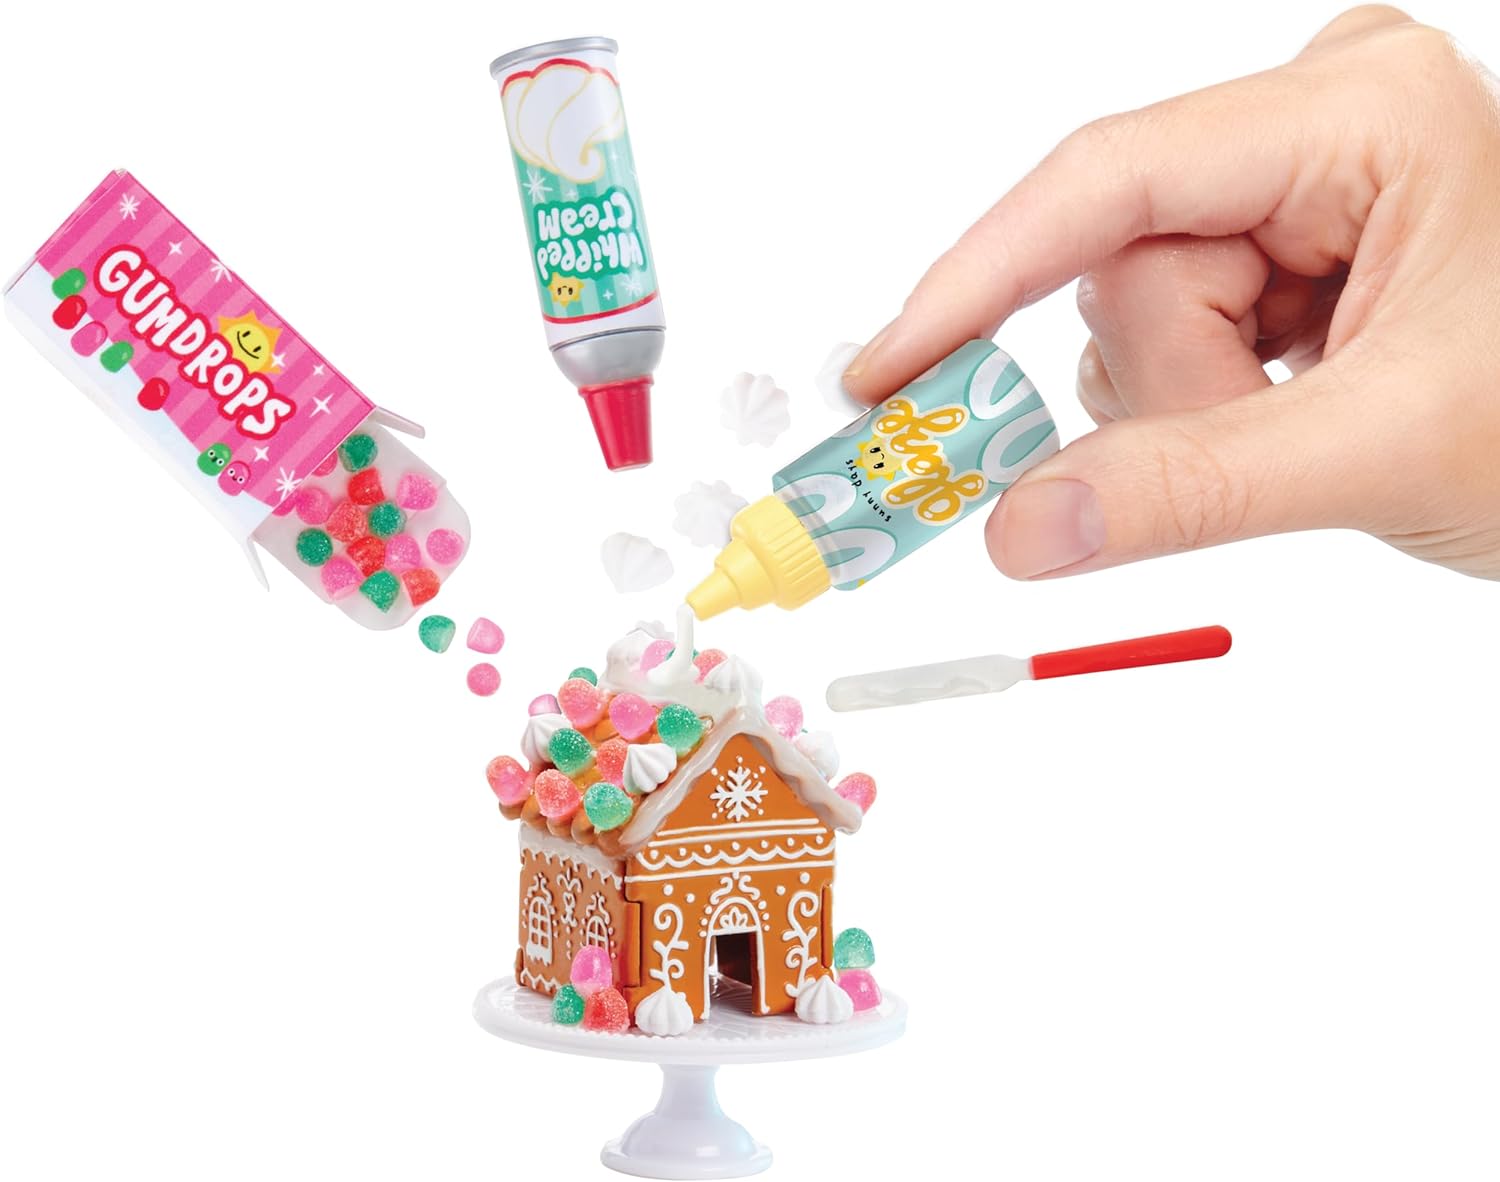 AS STRESSFUL AS BUILDING A REAL GINGERBREAD HOUSE! Miniverse Make It Mini  Food Holiday Edition! 